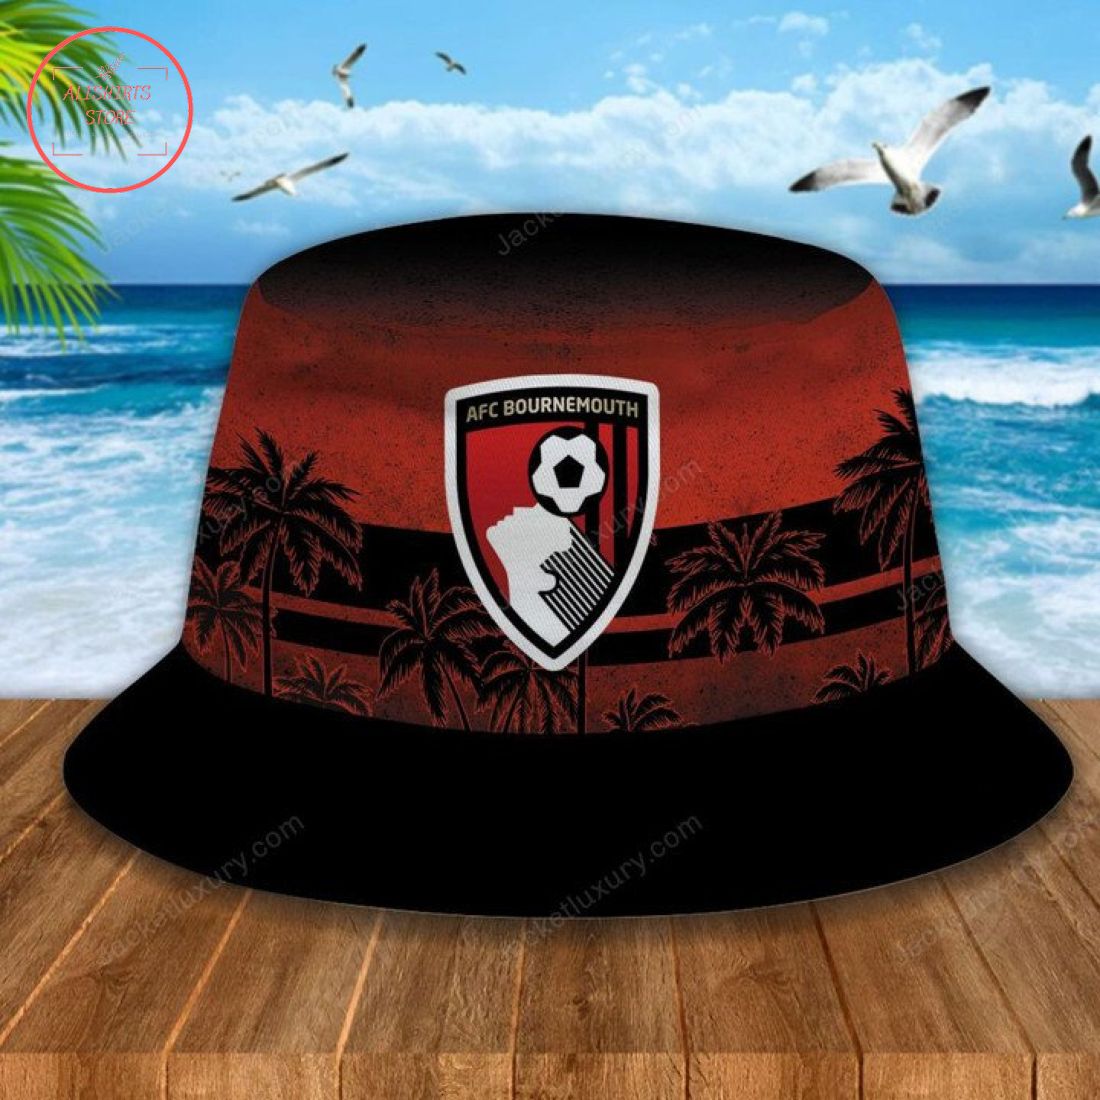 EPL A.F.C. Bournemouth Bucket Hat